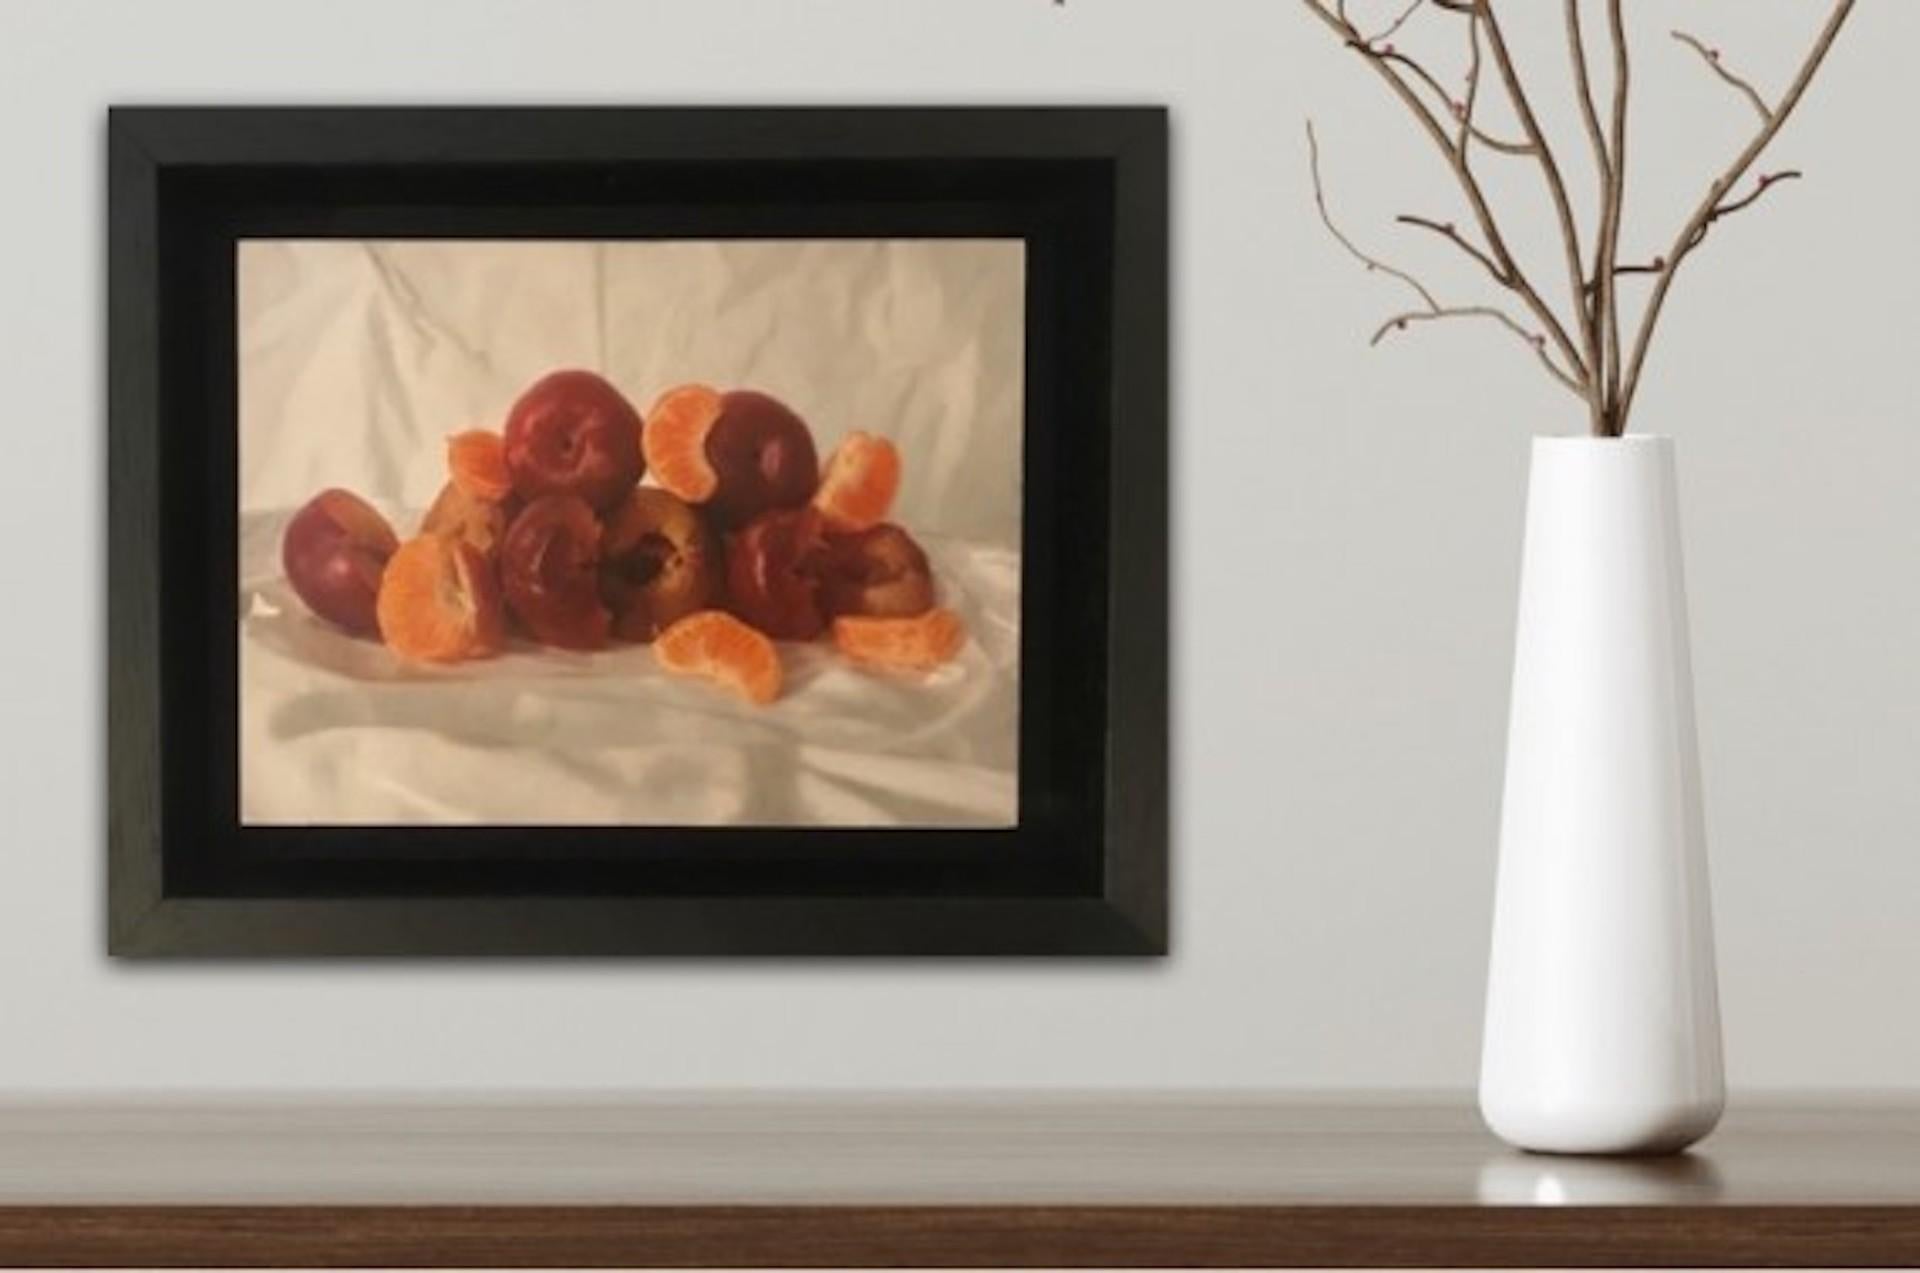 Kate Verrion, Cherries and Satsuma, Realist Still Life Fruit Painting 5